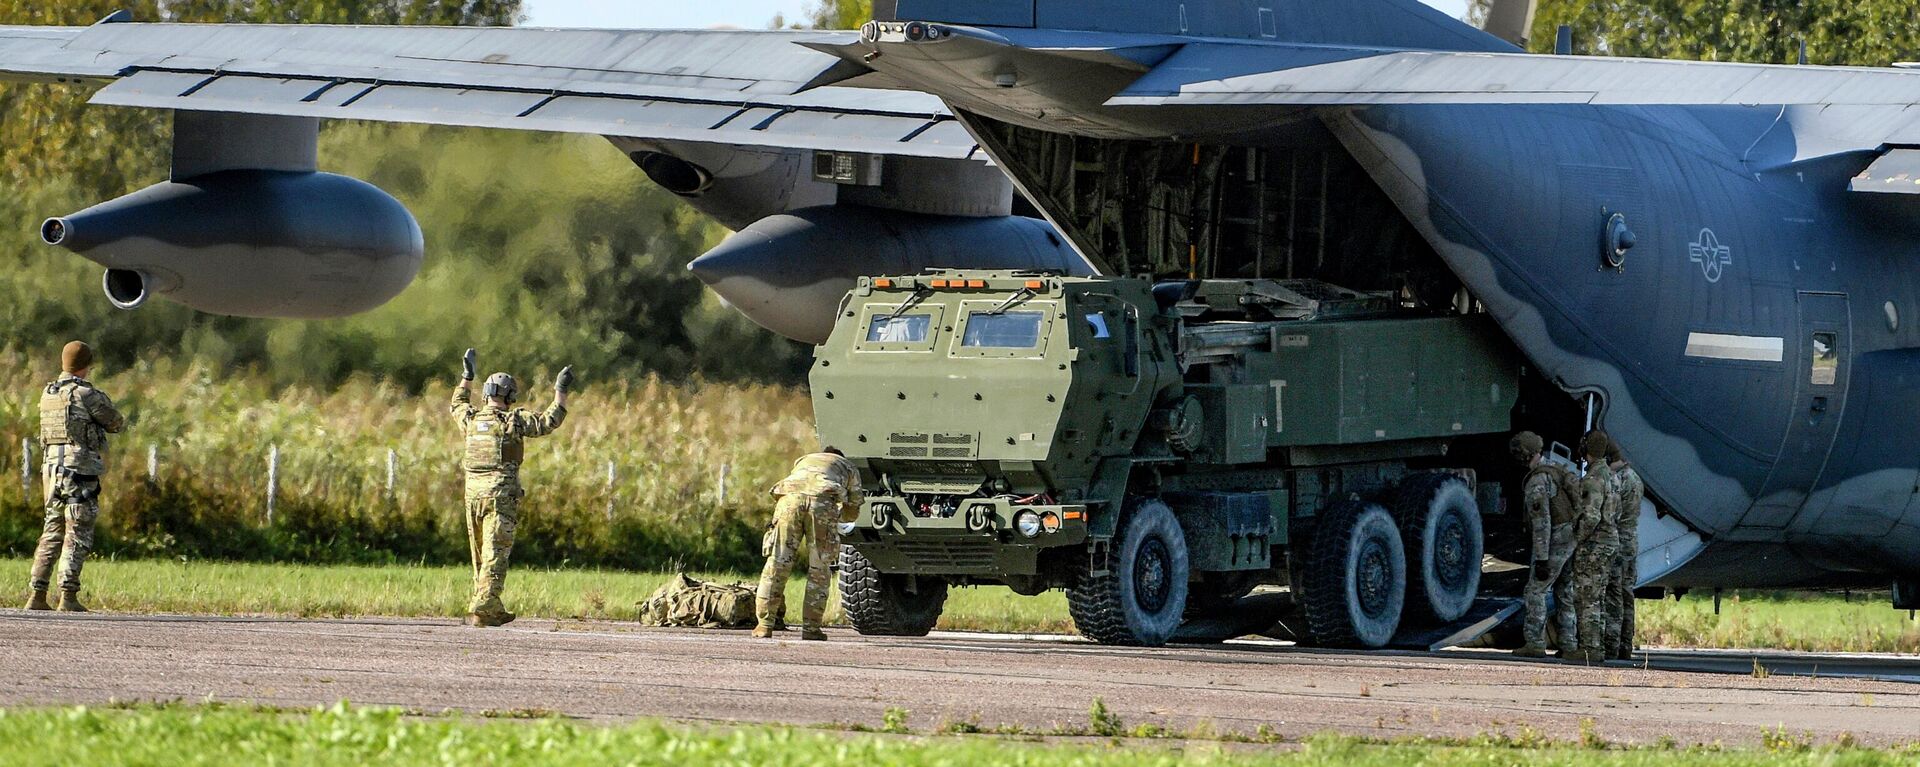 Soldiers load a High-Mobility Artillery Rocket System (HIMARS ) from a US Special Operations MC-130J aircraft during military exercises at Spilve Airport in Riga, Latvia, on Sept. 26, 2022. - Sputnik International, 1920, 01.11.2022